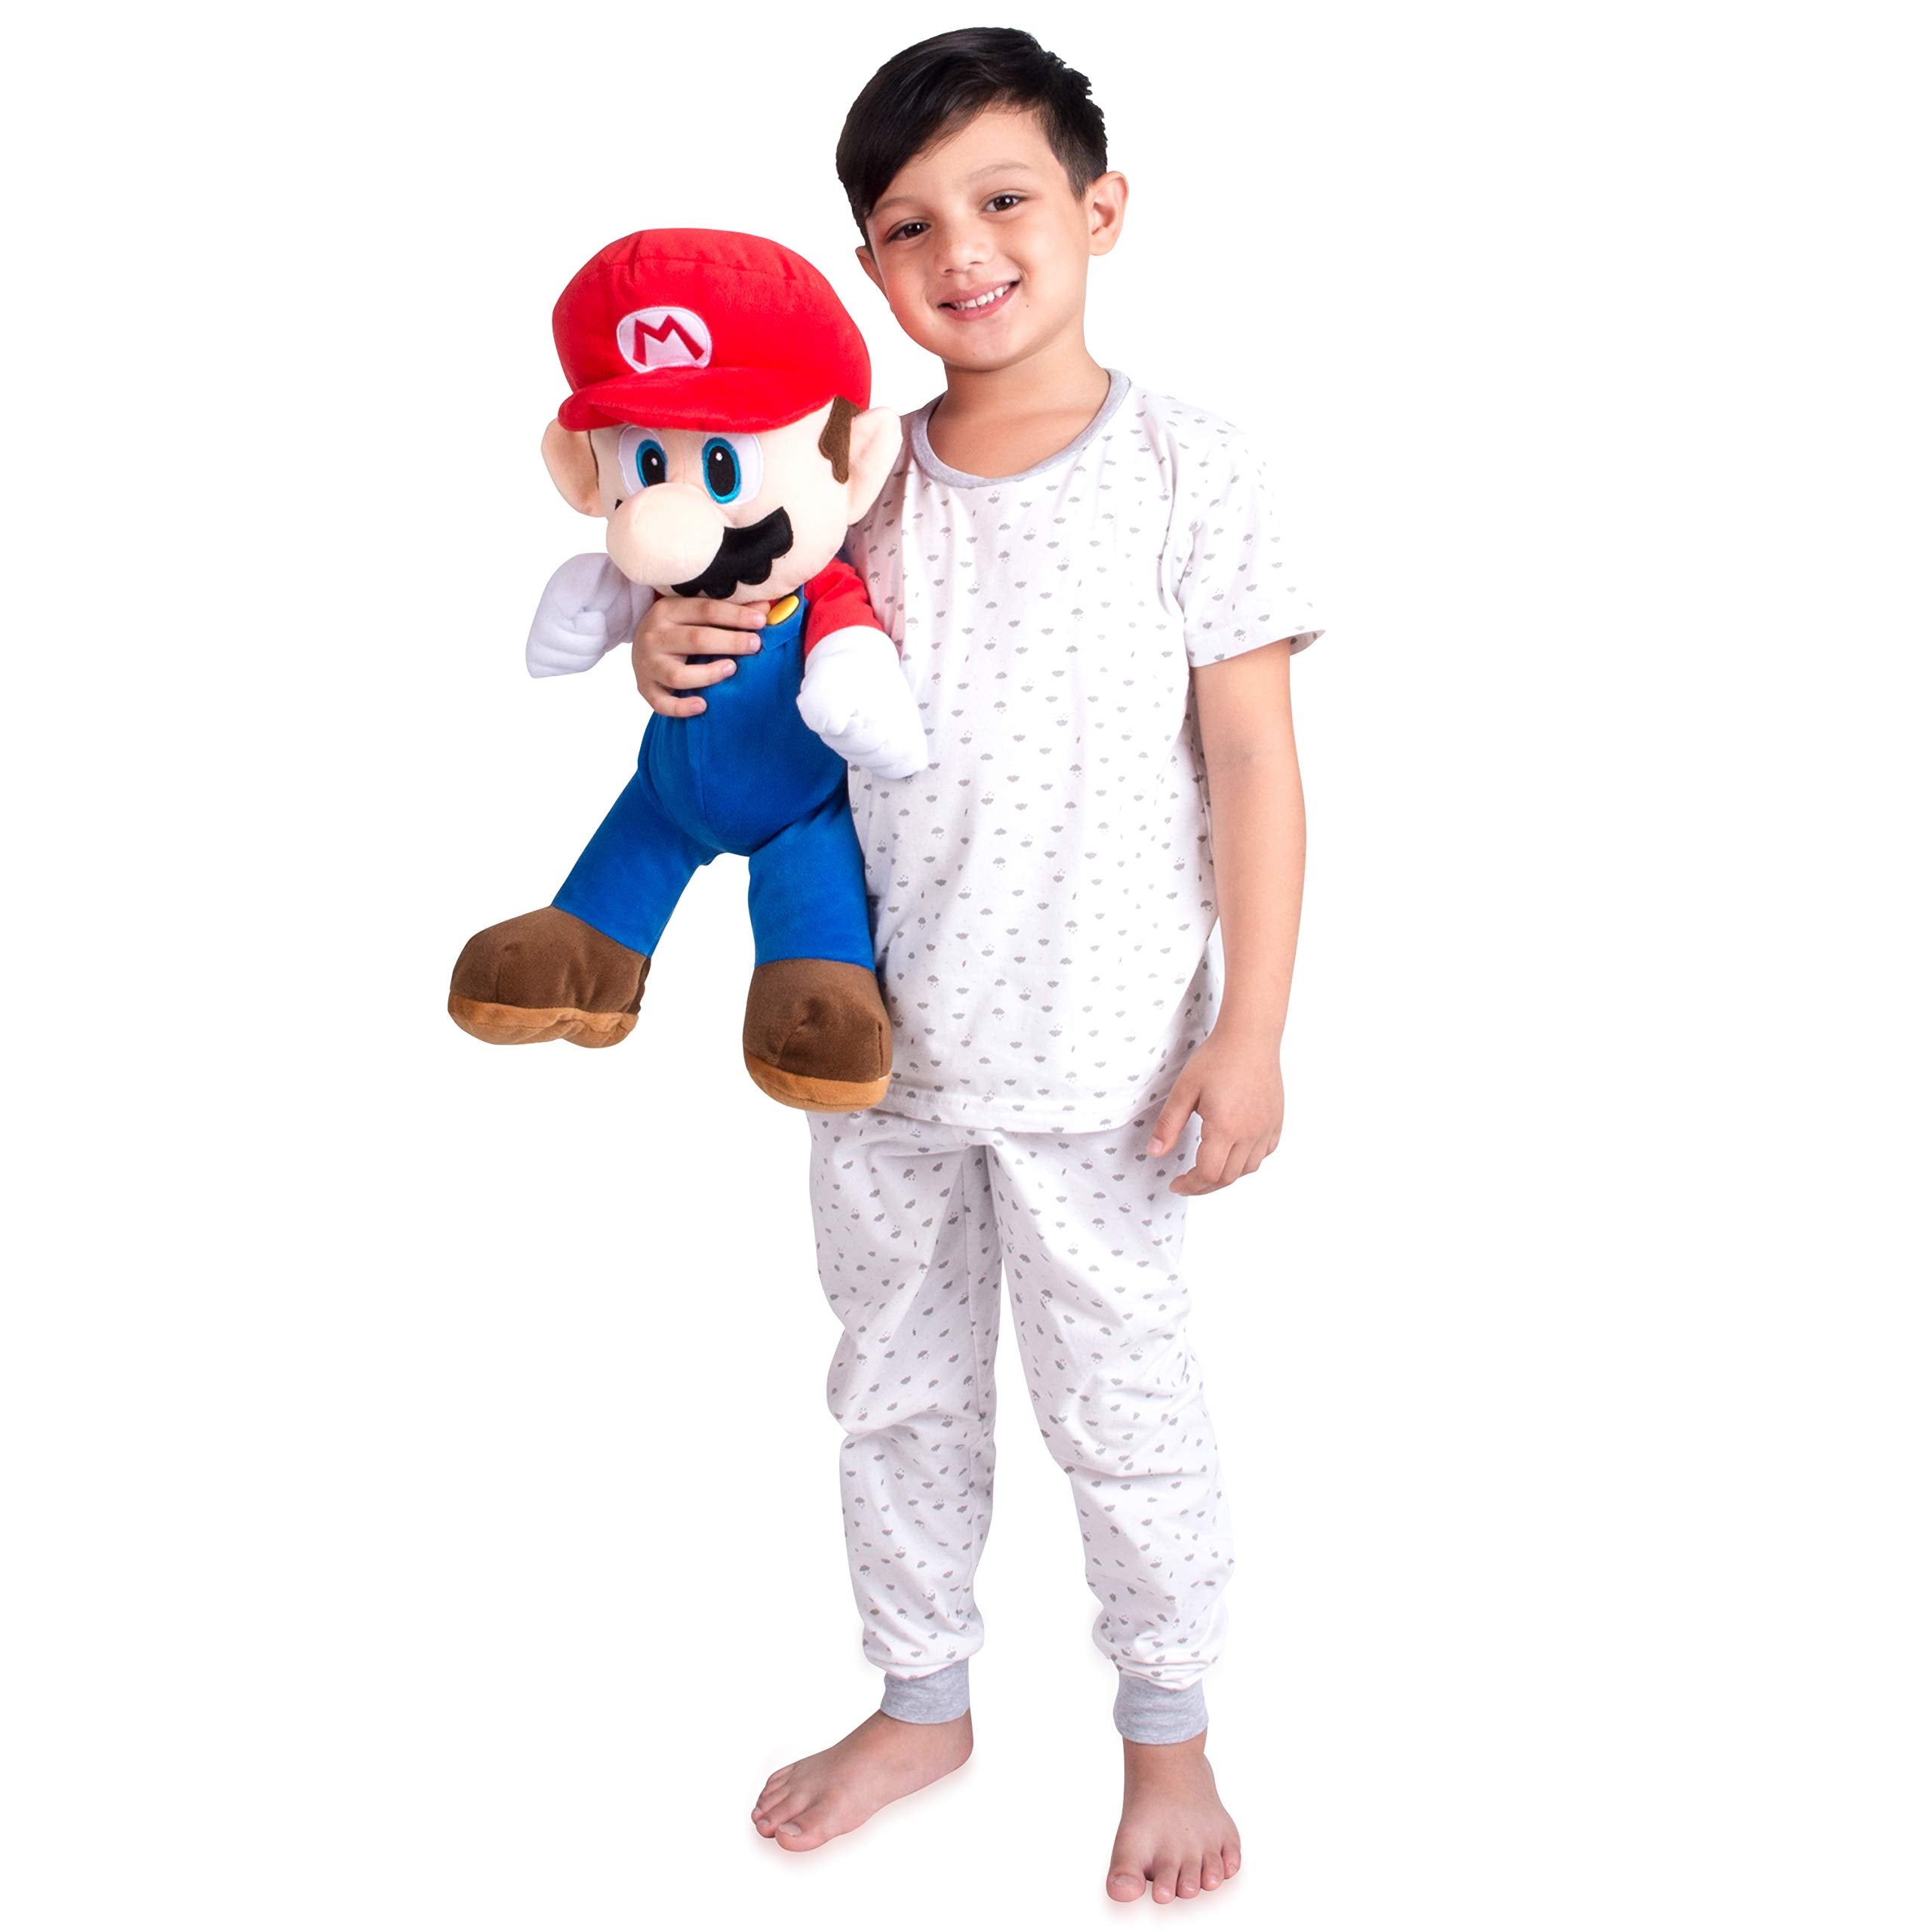 Super Mario Kids Bedding Super Soft Plush Cuddle Pillow Buddy, One Size, By Franco